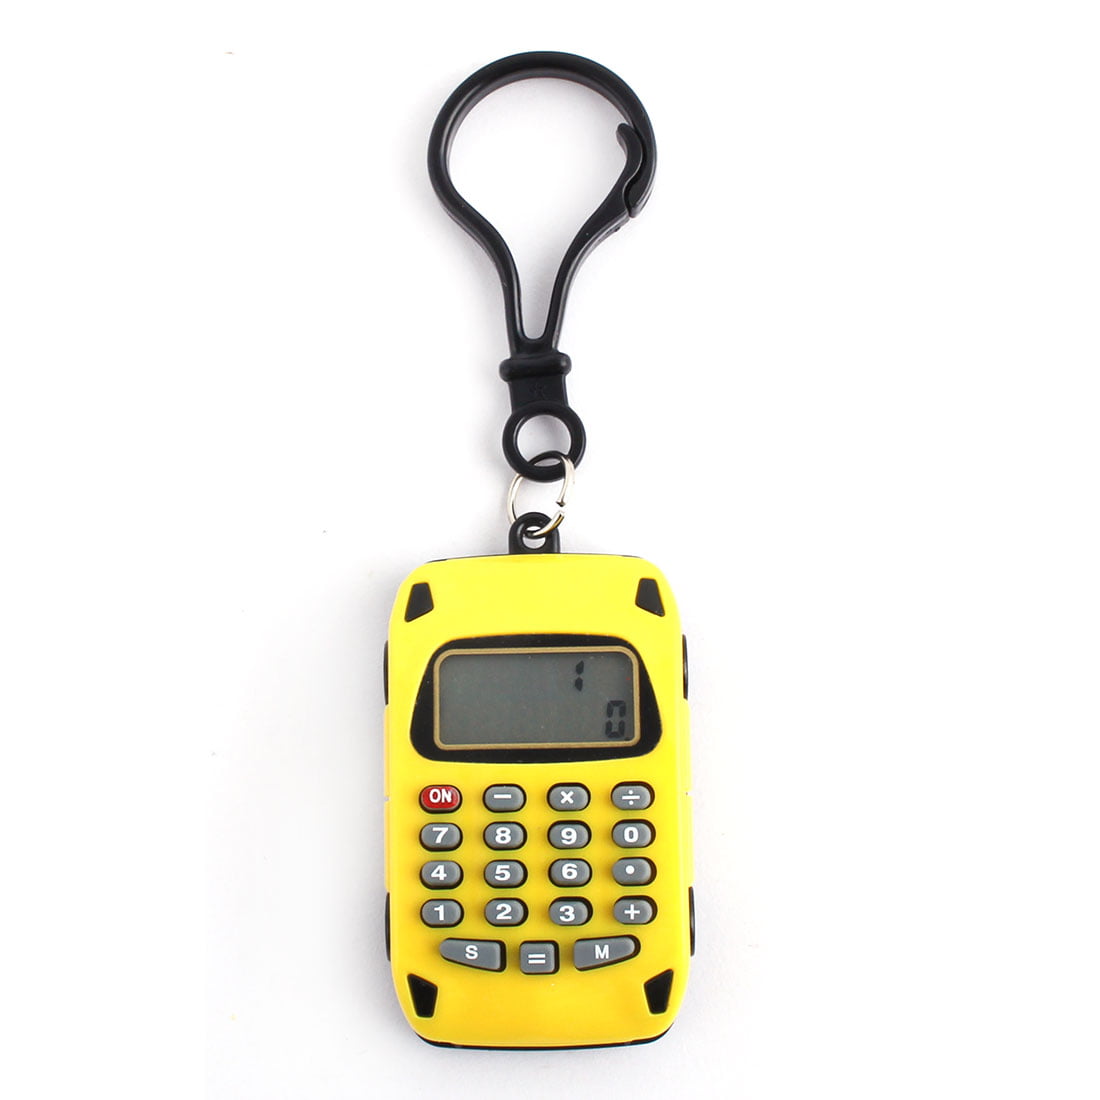 Plastic Biscuit Shape Portable LCD Display 8 Digits Calculator Key Chain 